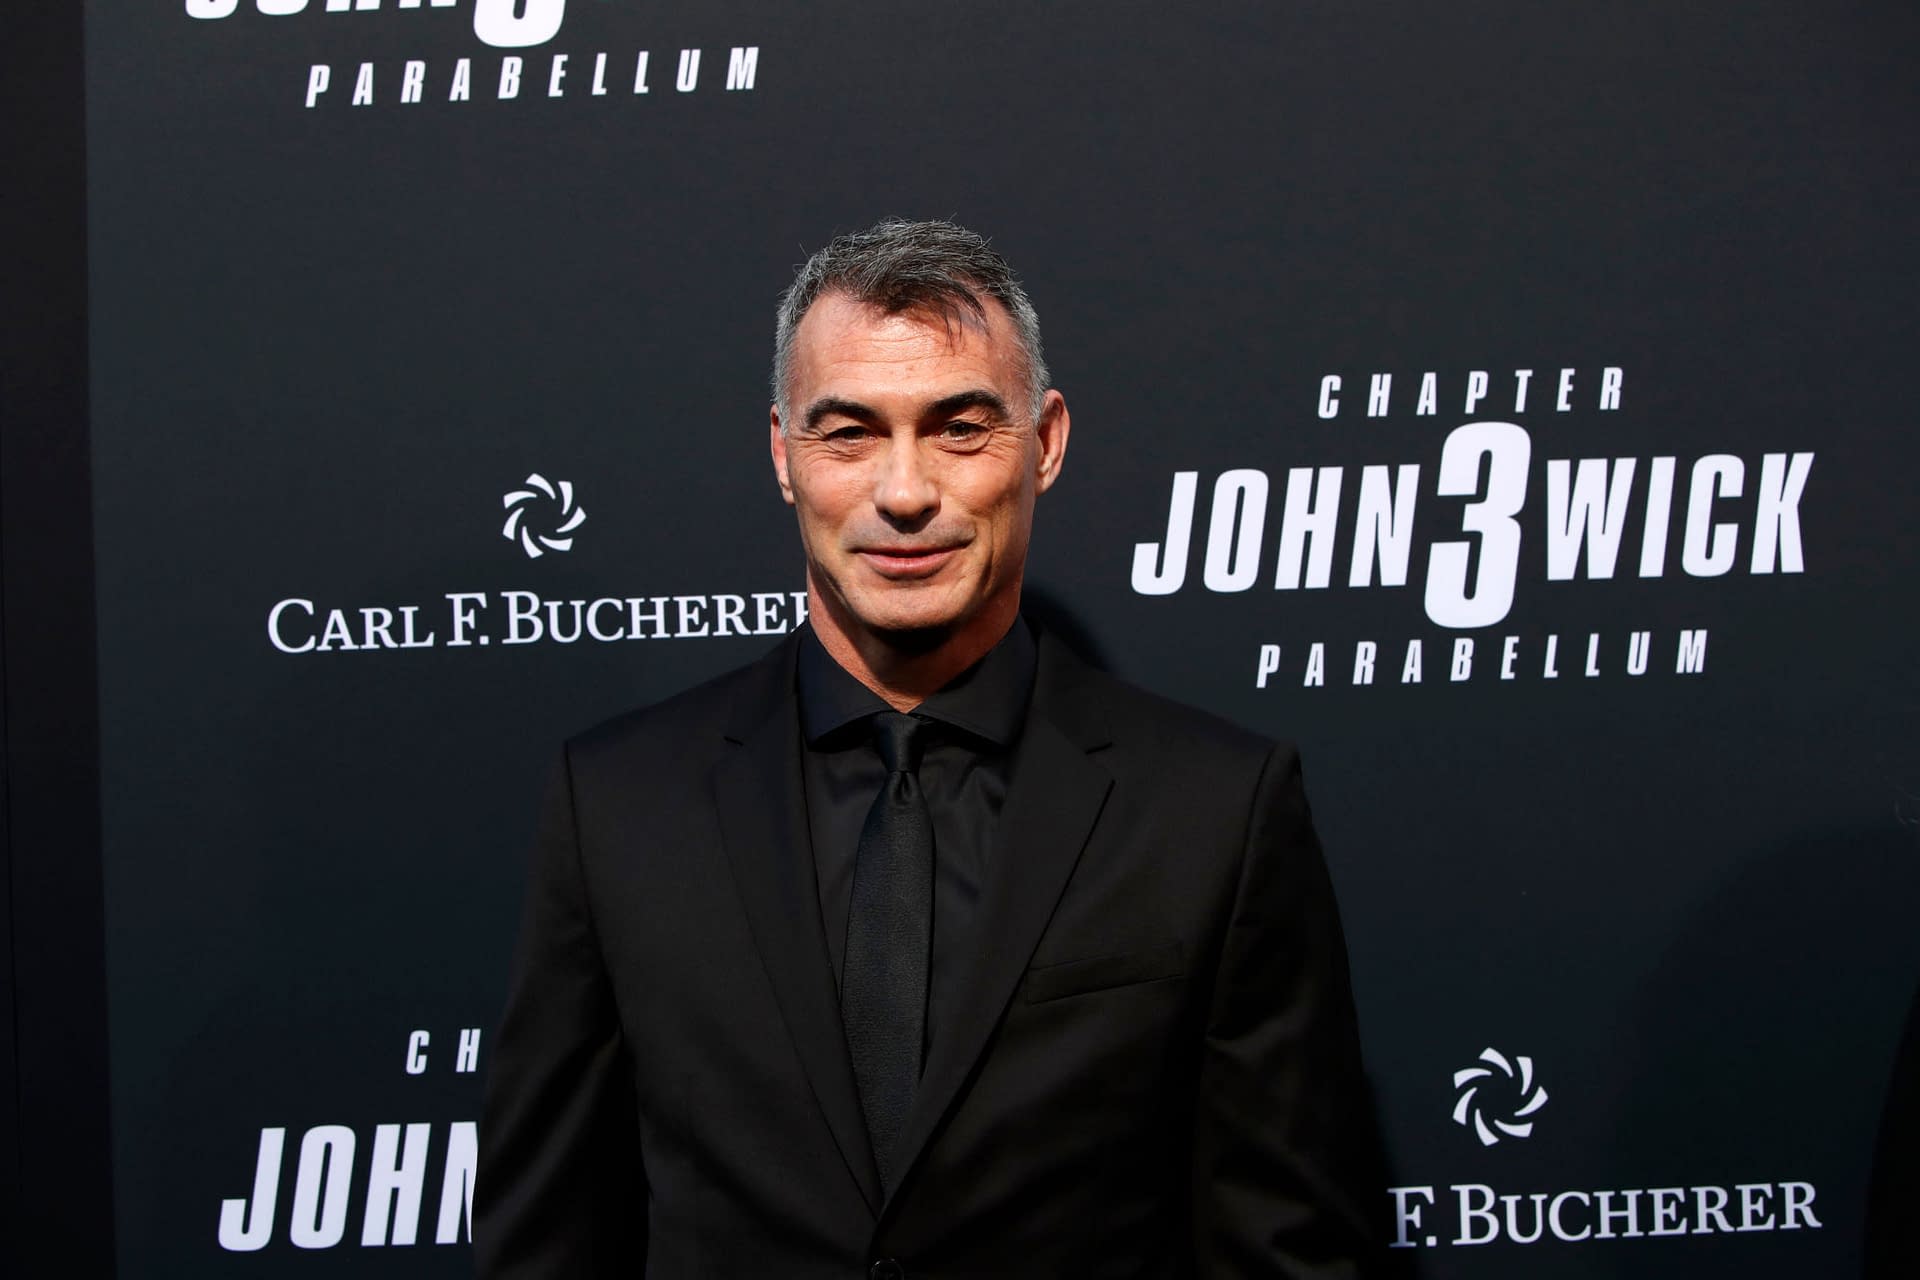 EXCLUSIVE: "John Wick: Chapter 3 - Parabellum" Director Chad Stahelski Talks Progressing as a Director and Halle Berry